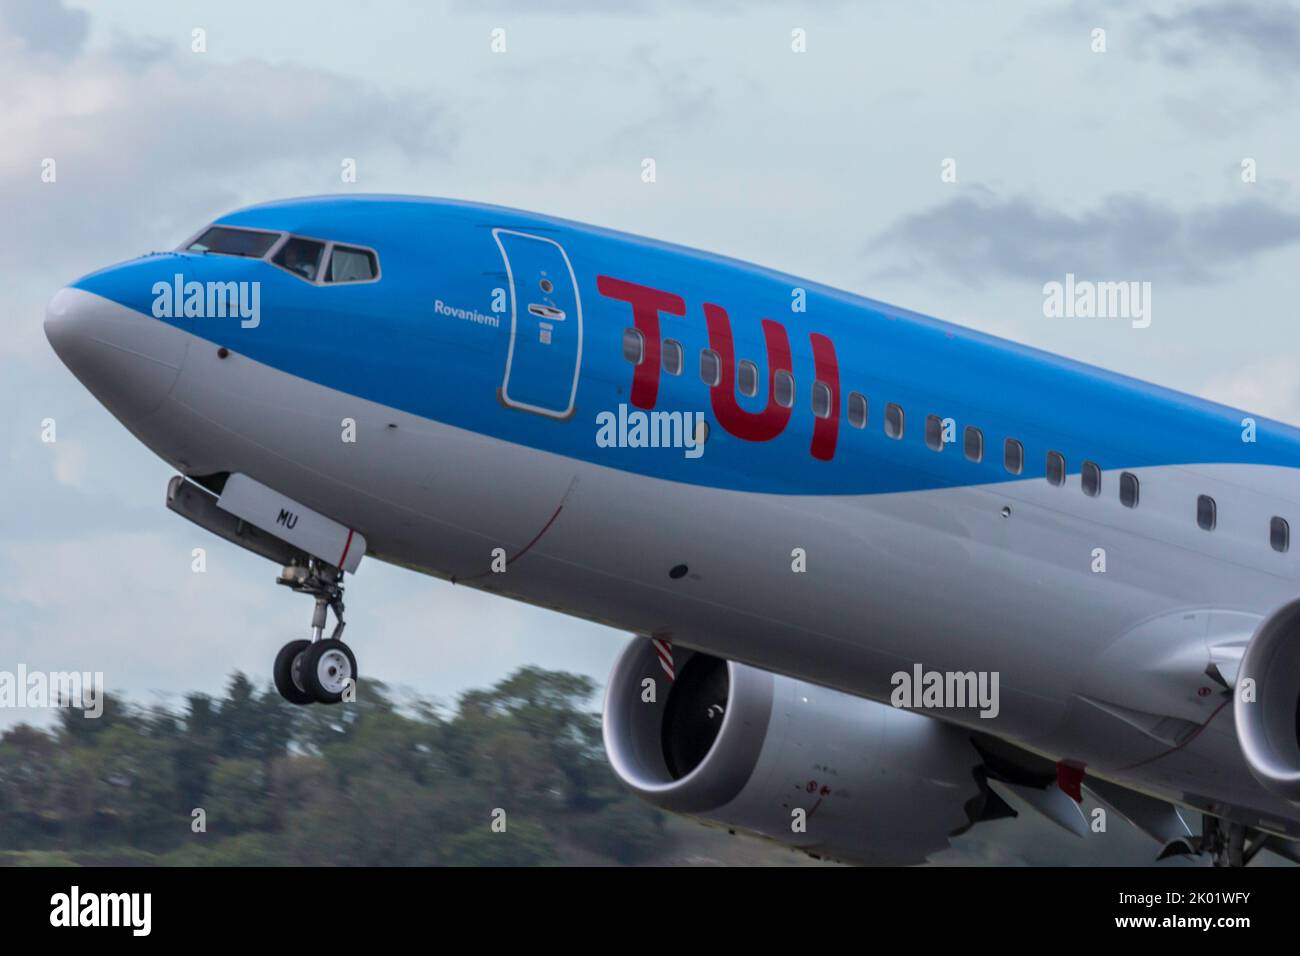 a TUI Airliners Boeing 737 Max 8, serial number G-TUMU, taking off from Bristol Lulsgate Airport in England. Stock Photo